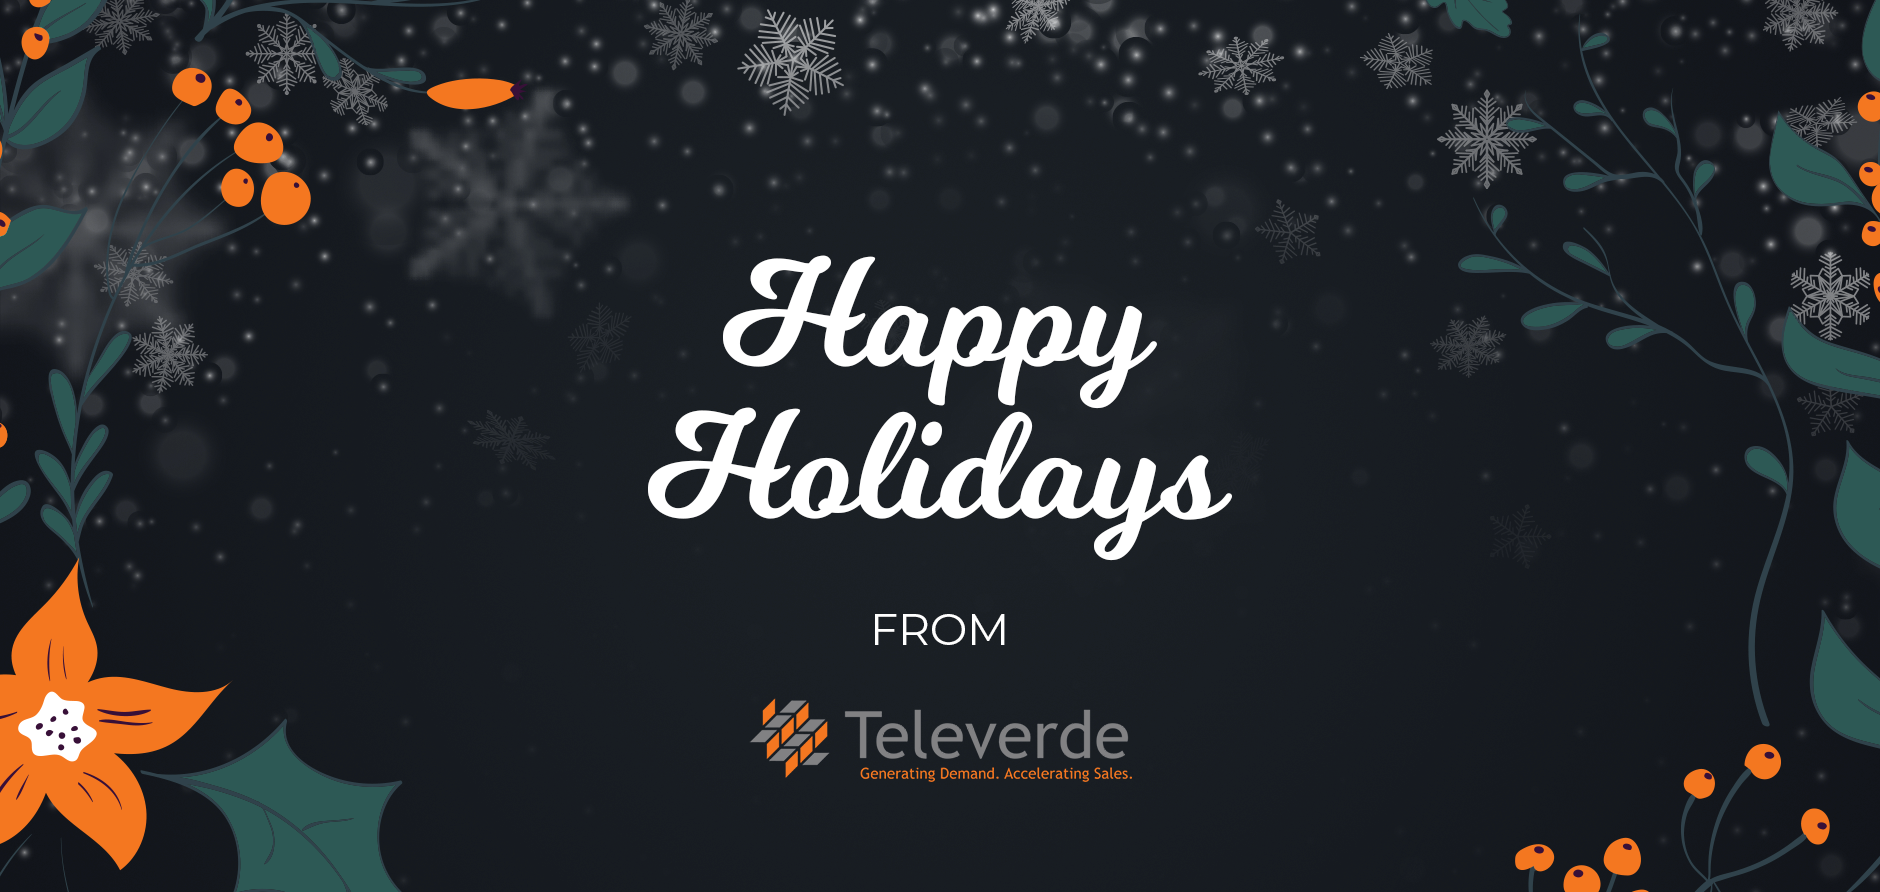 Holiday Message Televerde